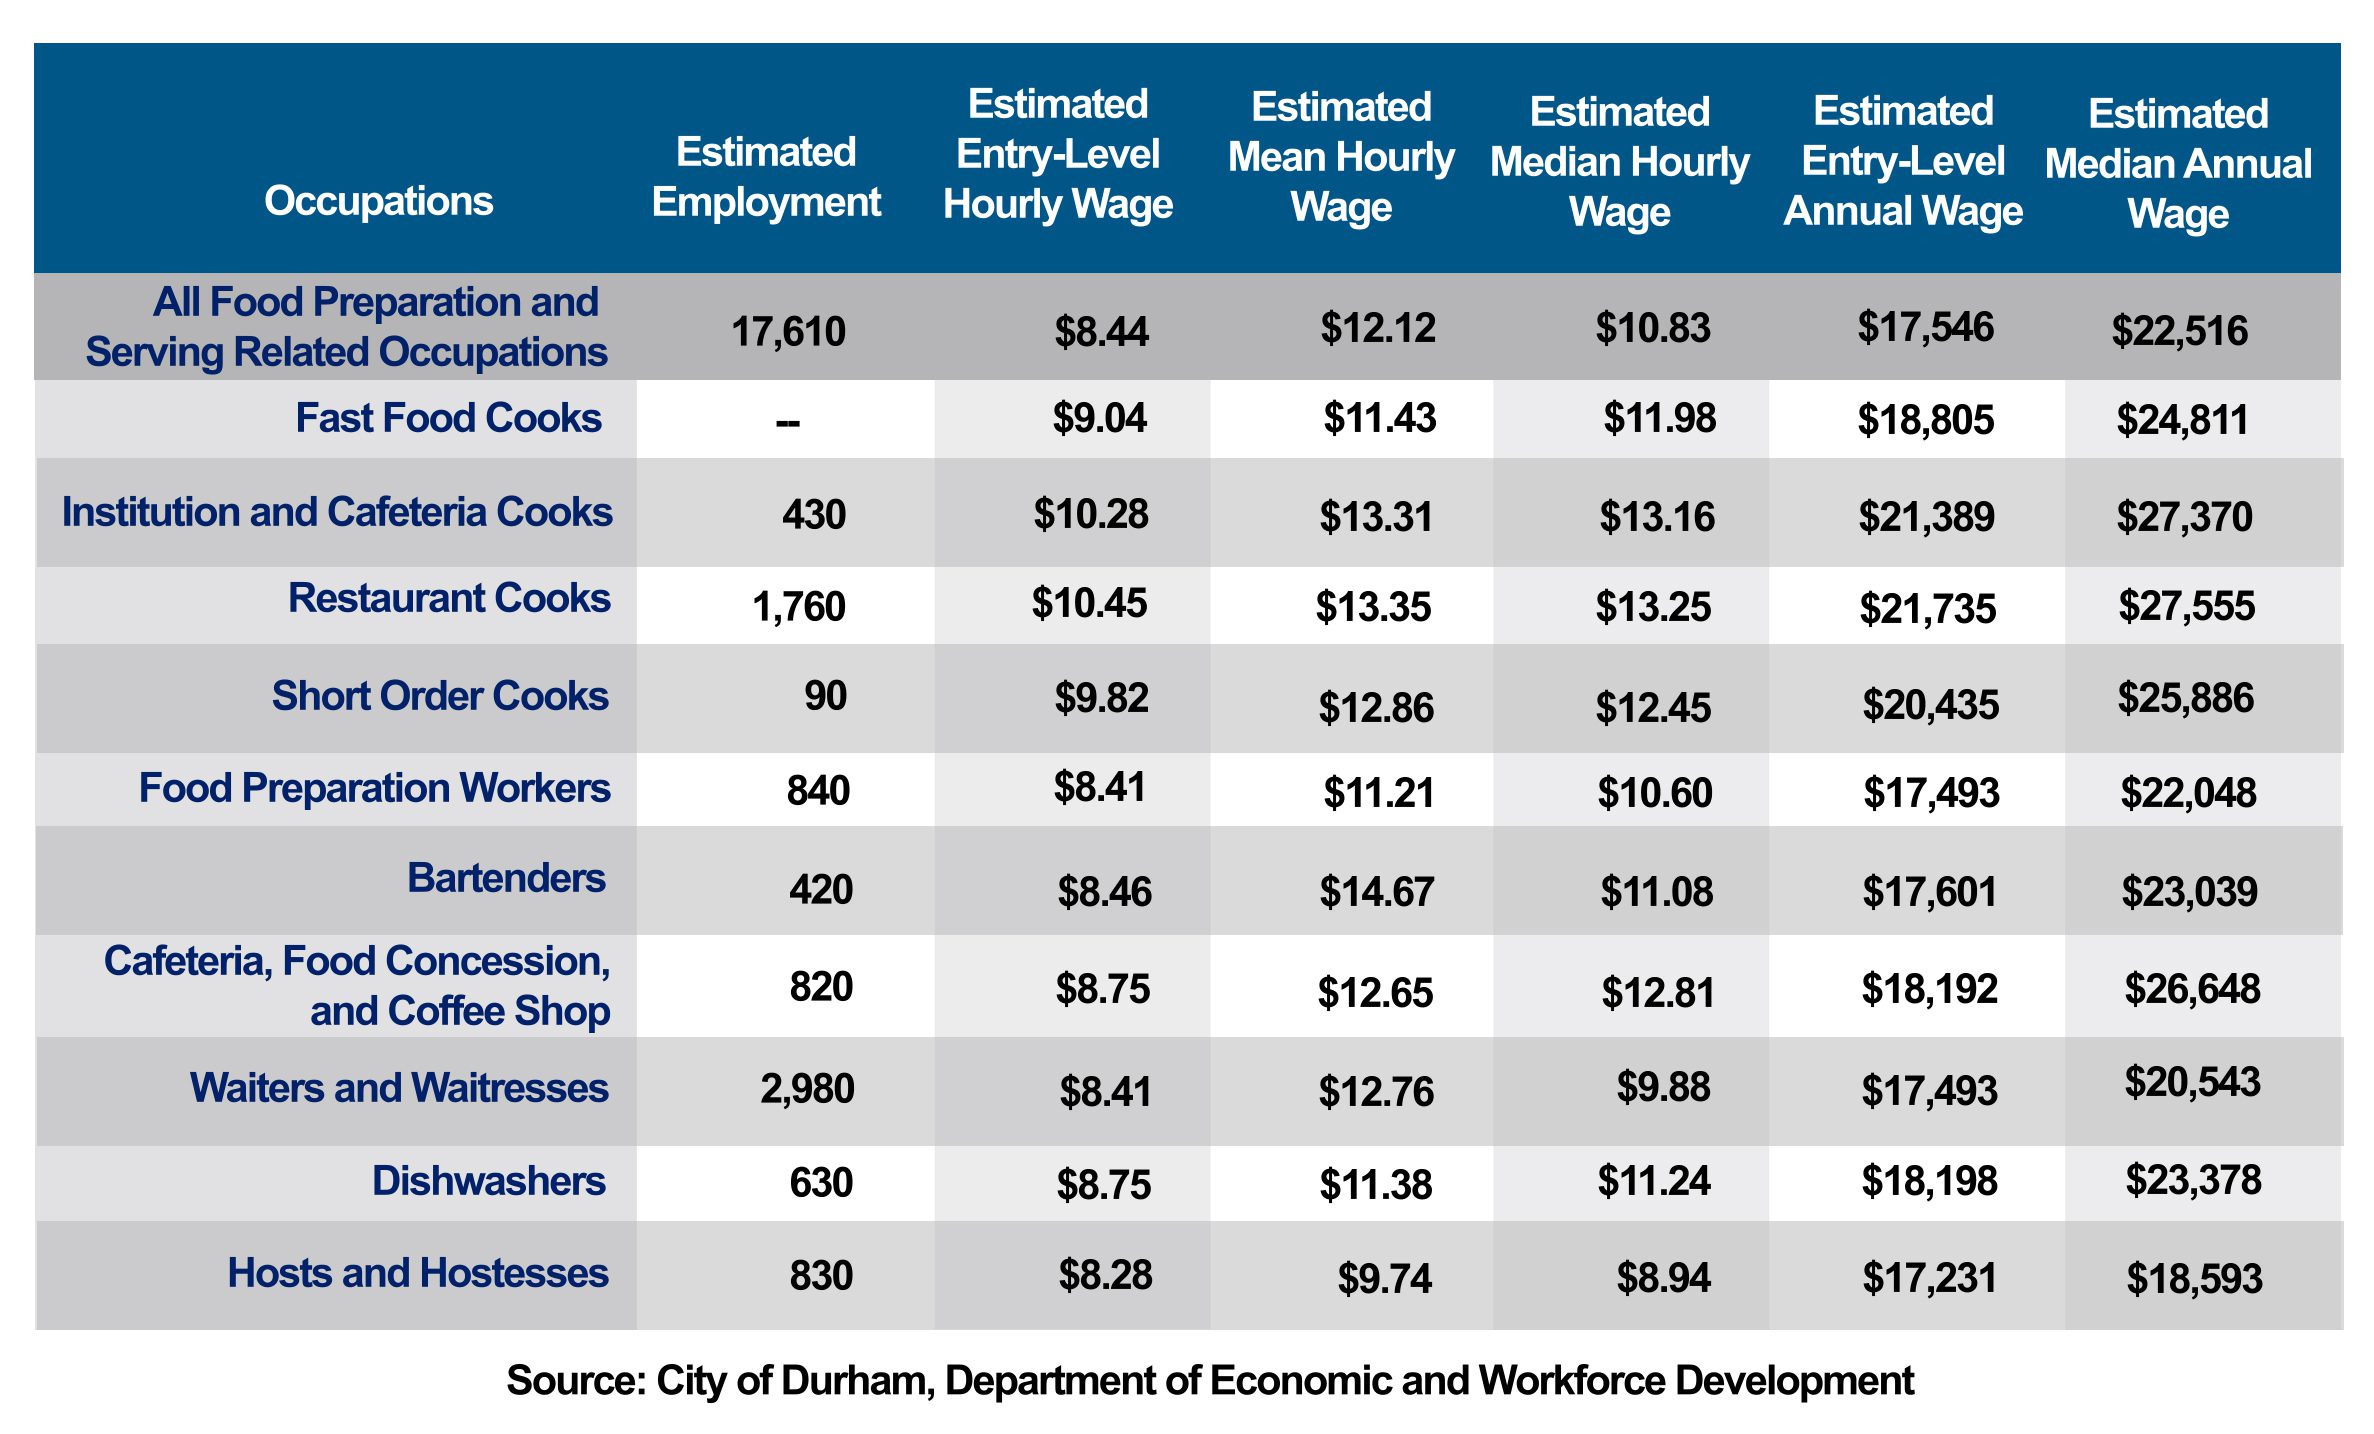 Table 9. Wages for Food Workers in Durham County, 2019. Source: City of Durham Department of Economic and Workforce Development